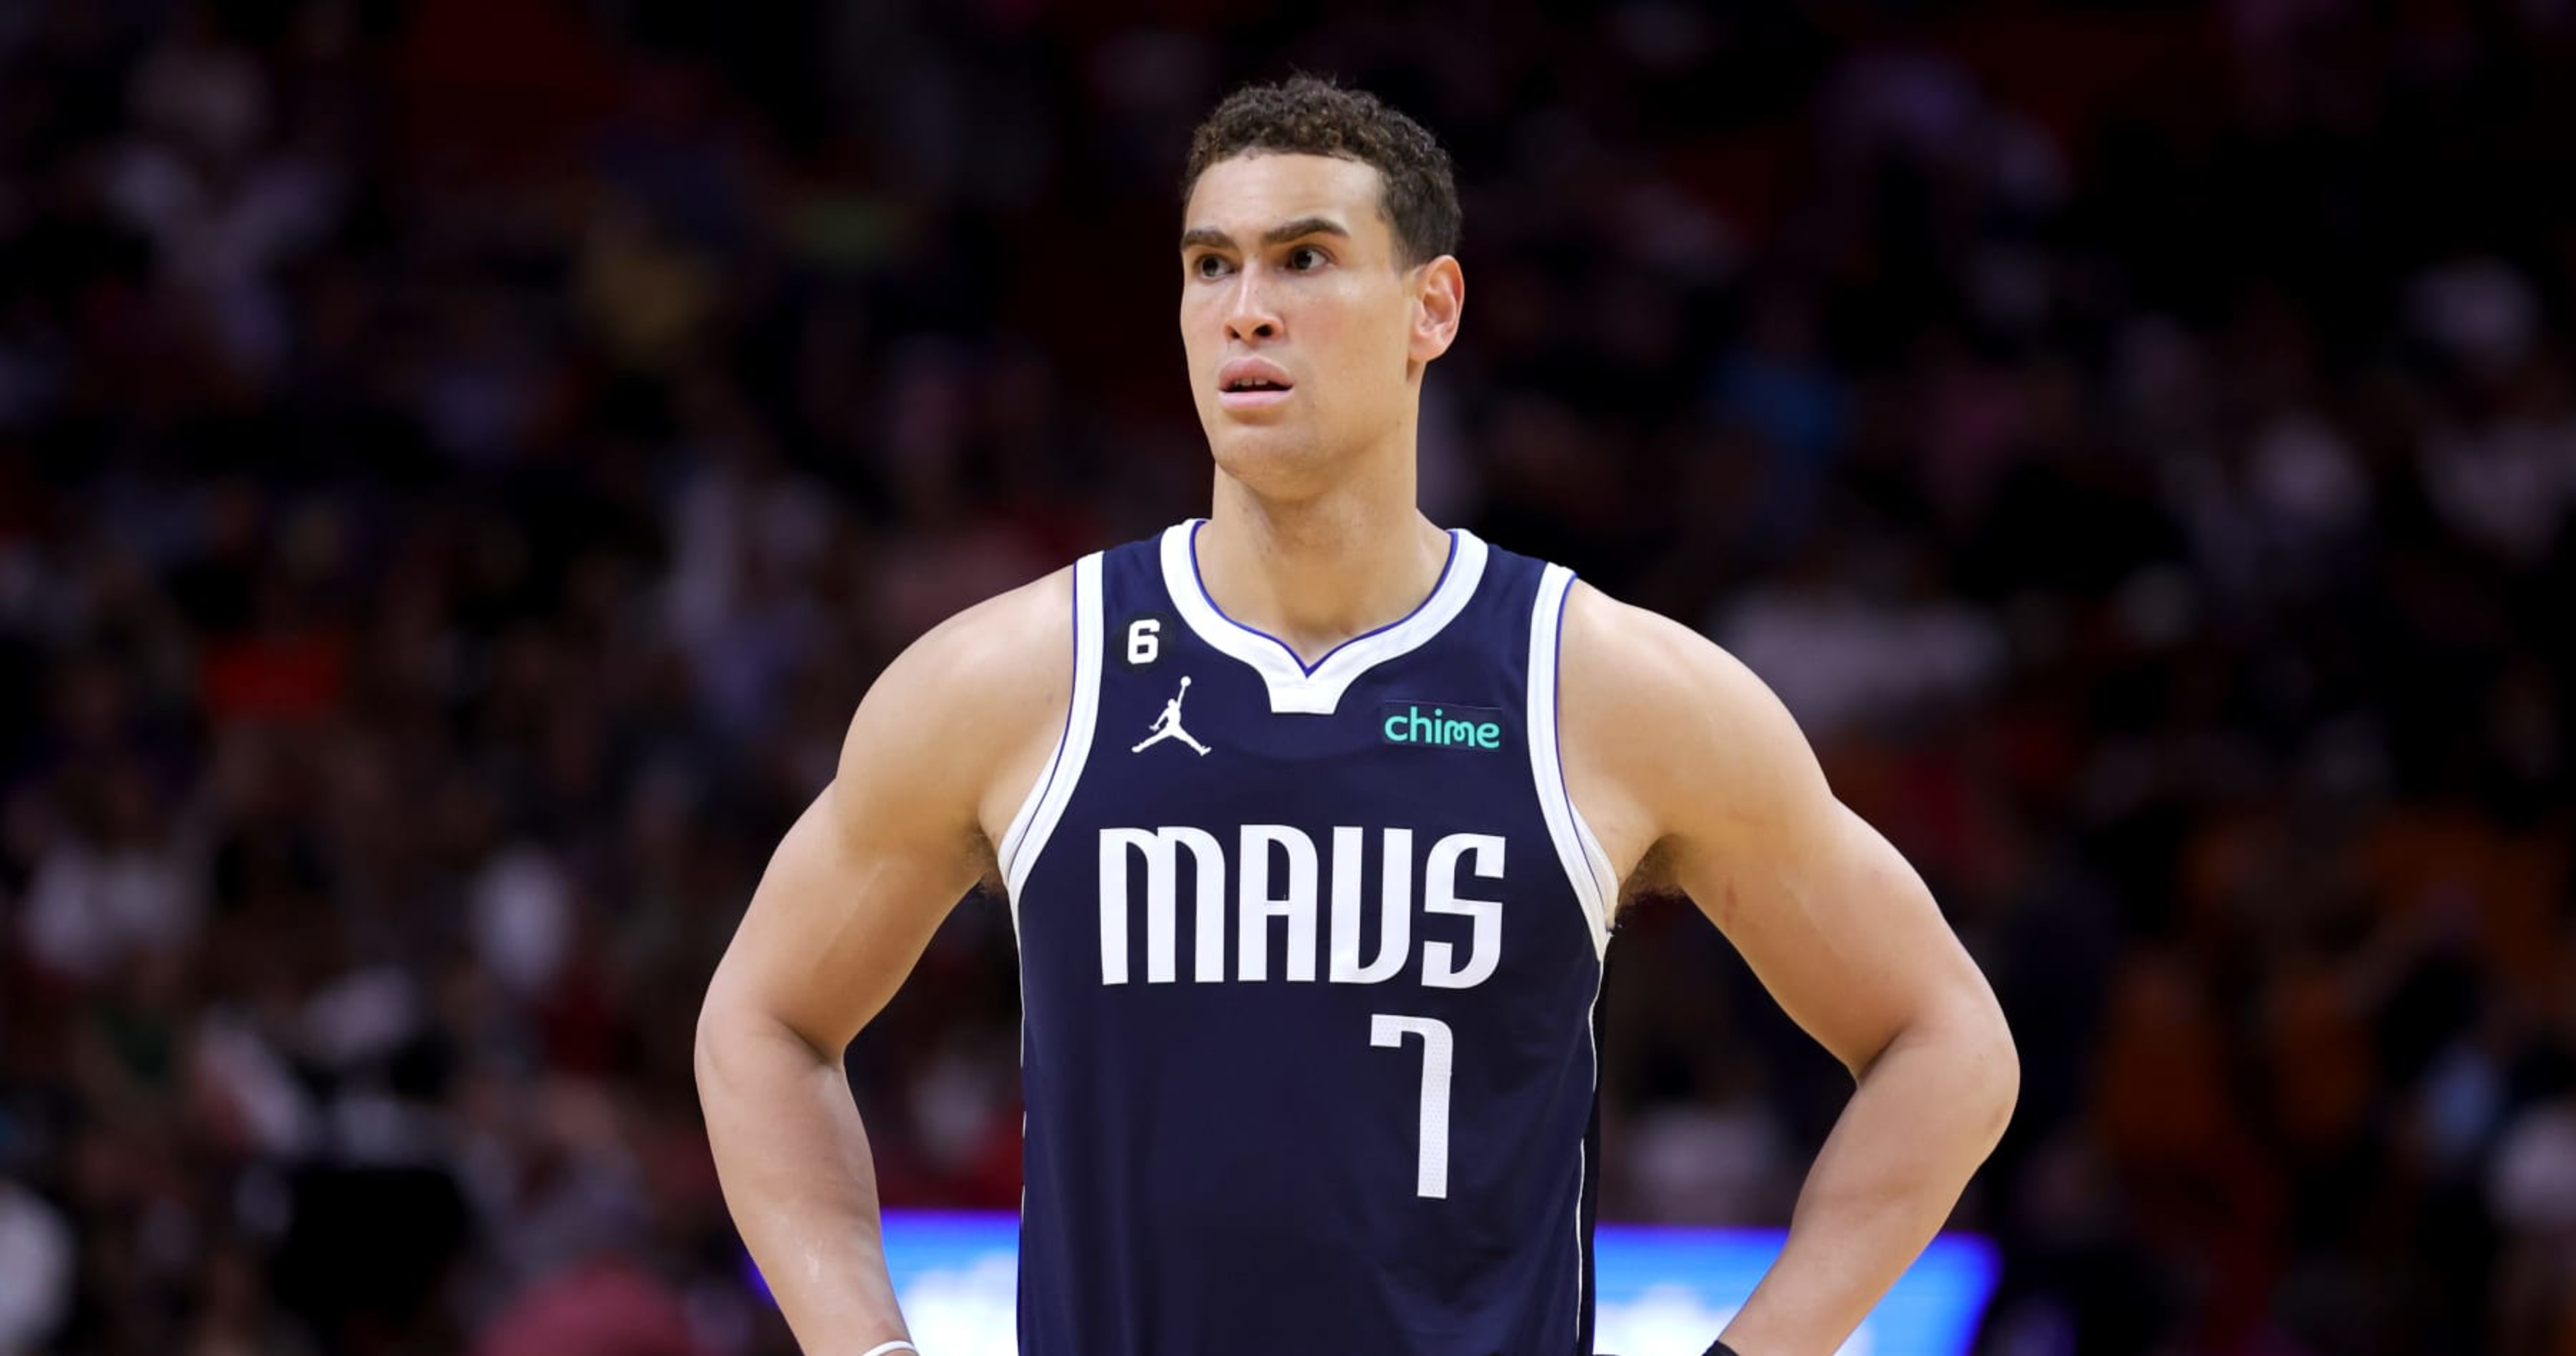 Veteran center Dwight Powell agrees to three-year deal to return